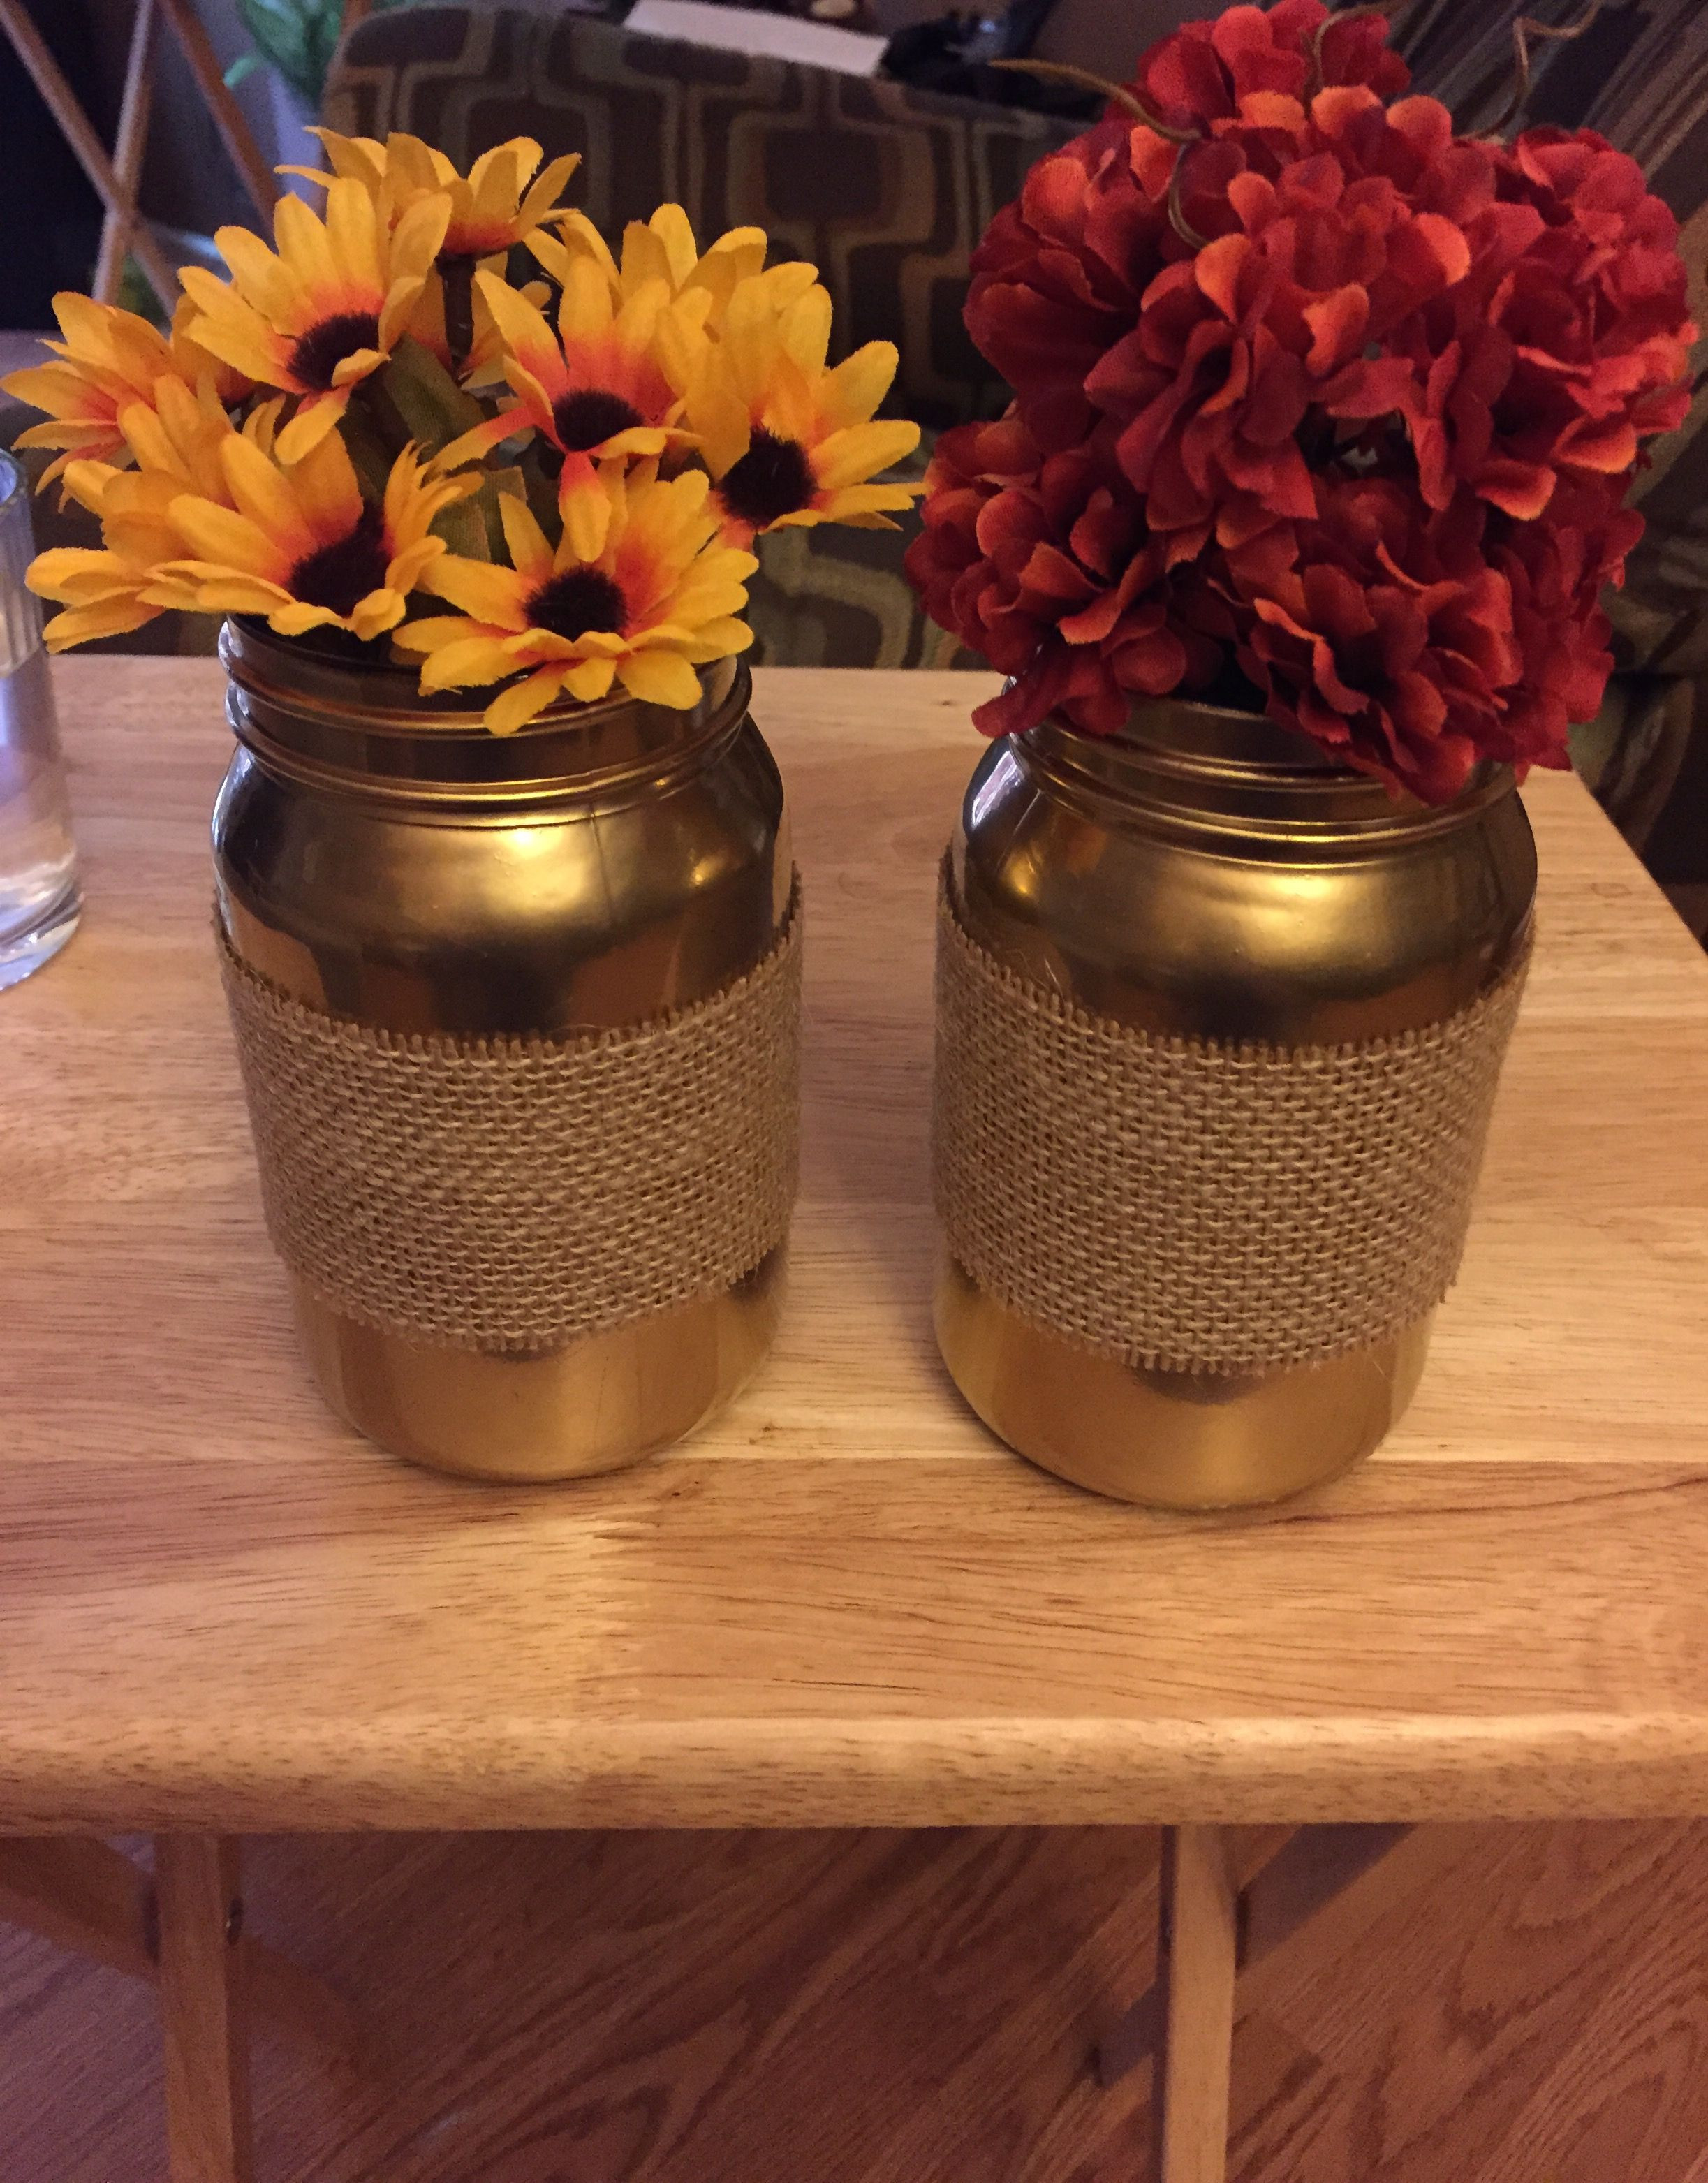 15 Recommended Gold Colored Vases 2024 free download gold colored vases of gold jar vases wrapped with burlap and fall color flowers mason regarding gold jar vases wrapped with burlap and fall color flowers